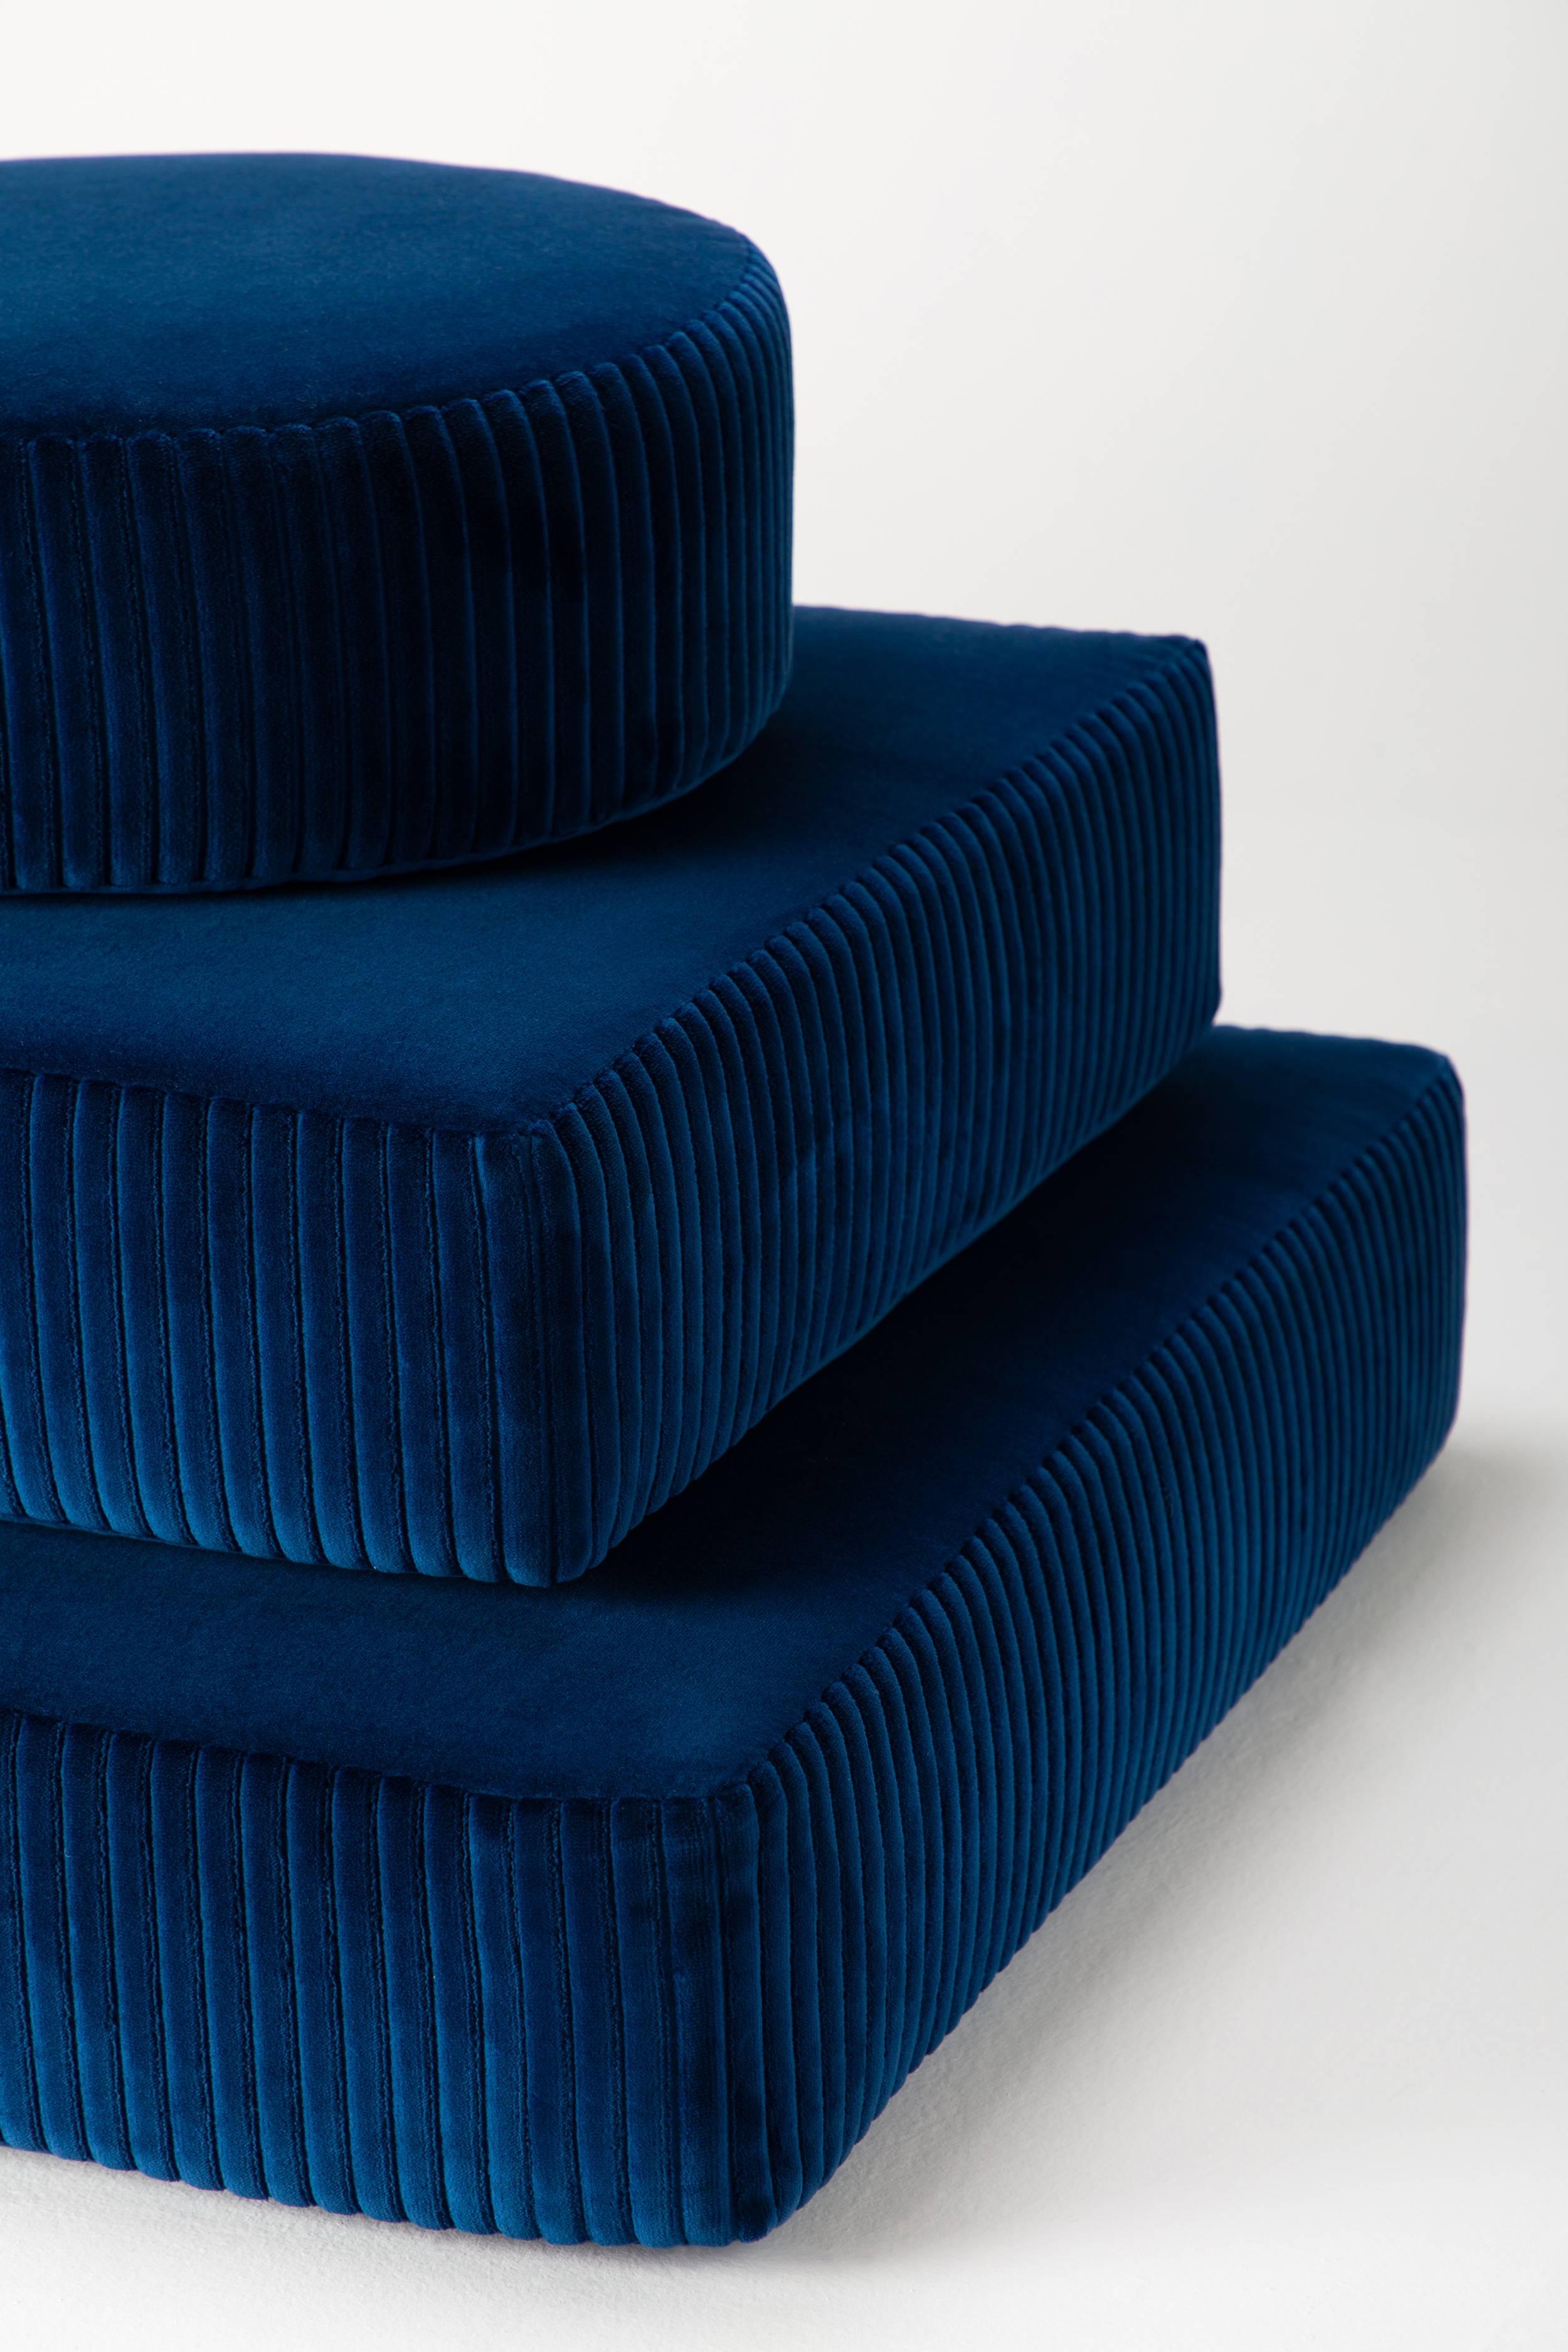 The stacks bench is an elegant interpretation of stacked meditation stones and offers the functionality of meditation cushions. Upholstered in a luxurious velvet, each layer can be removed to provide the opportunity for a different seated